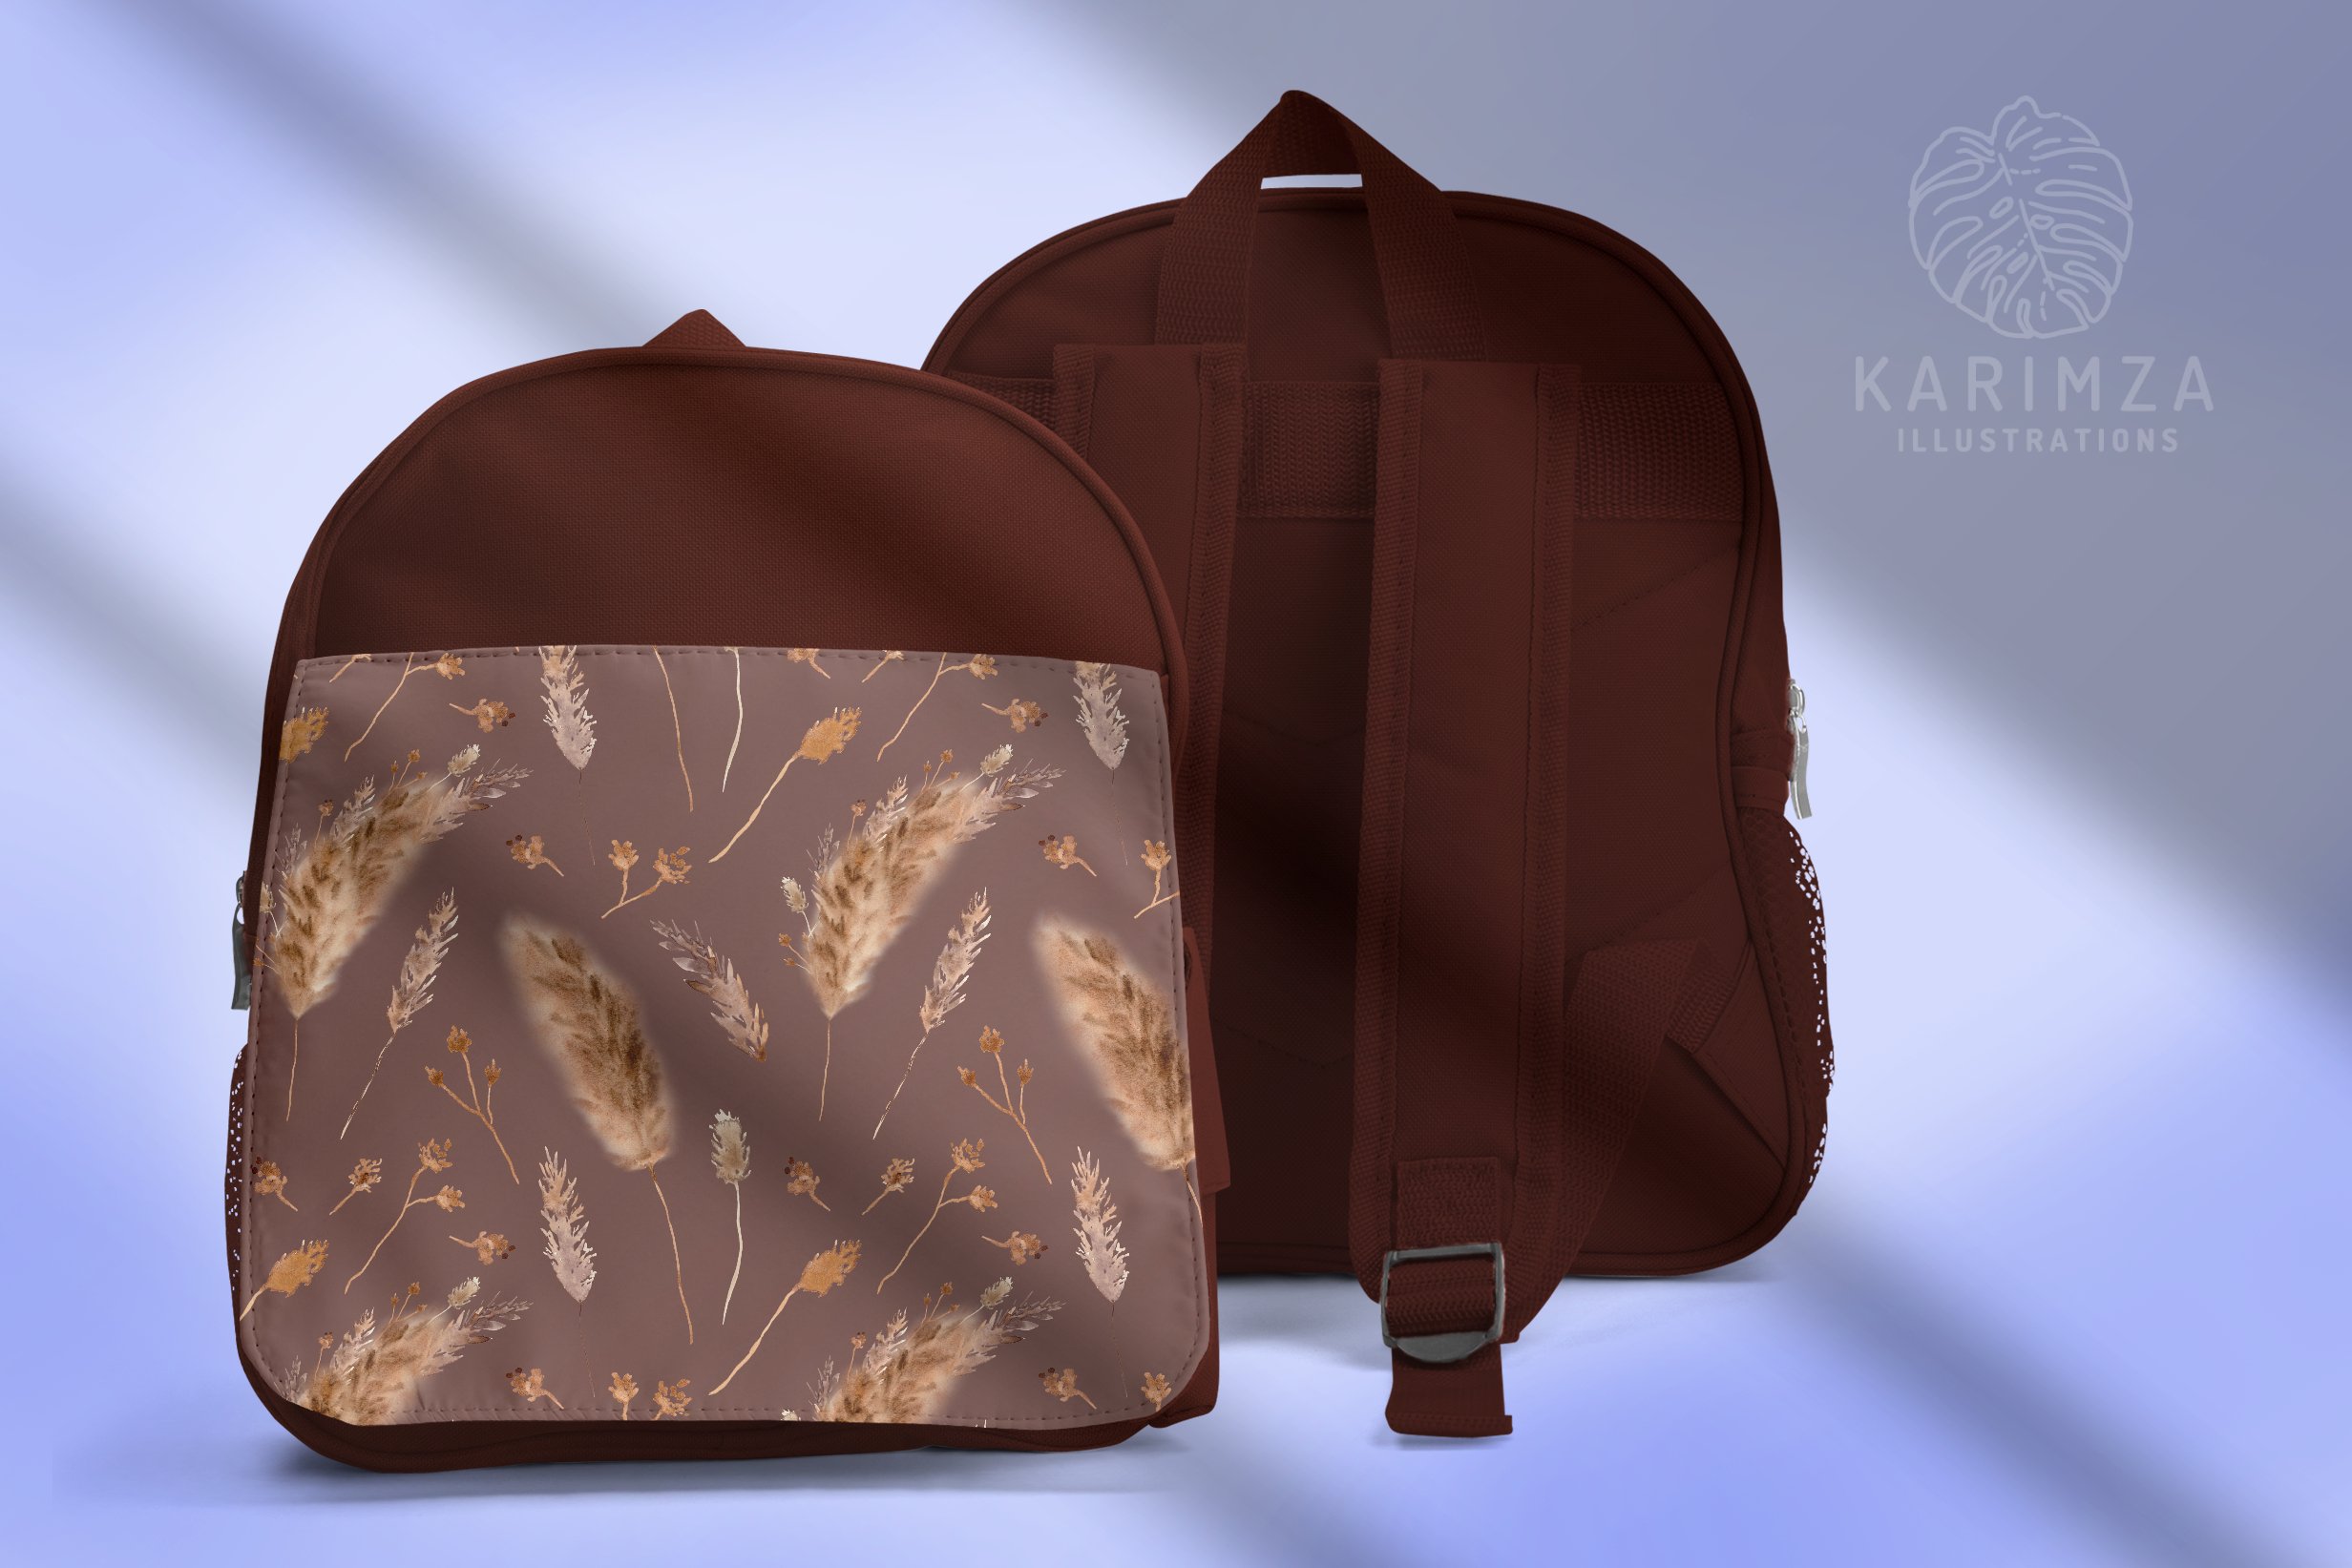 Brown backpack and a brown and white backpack.